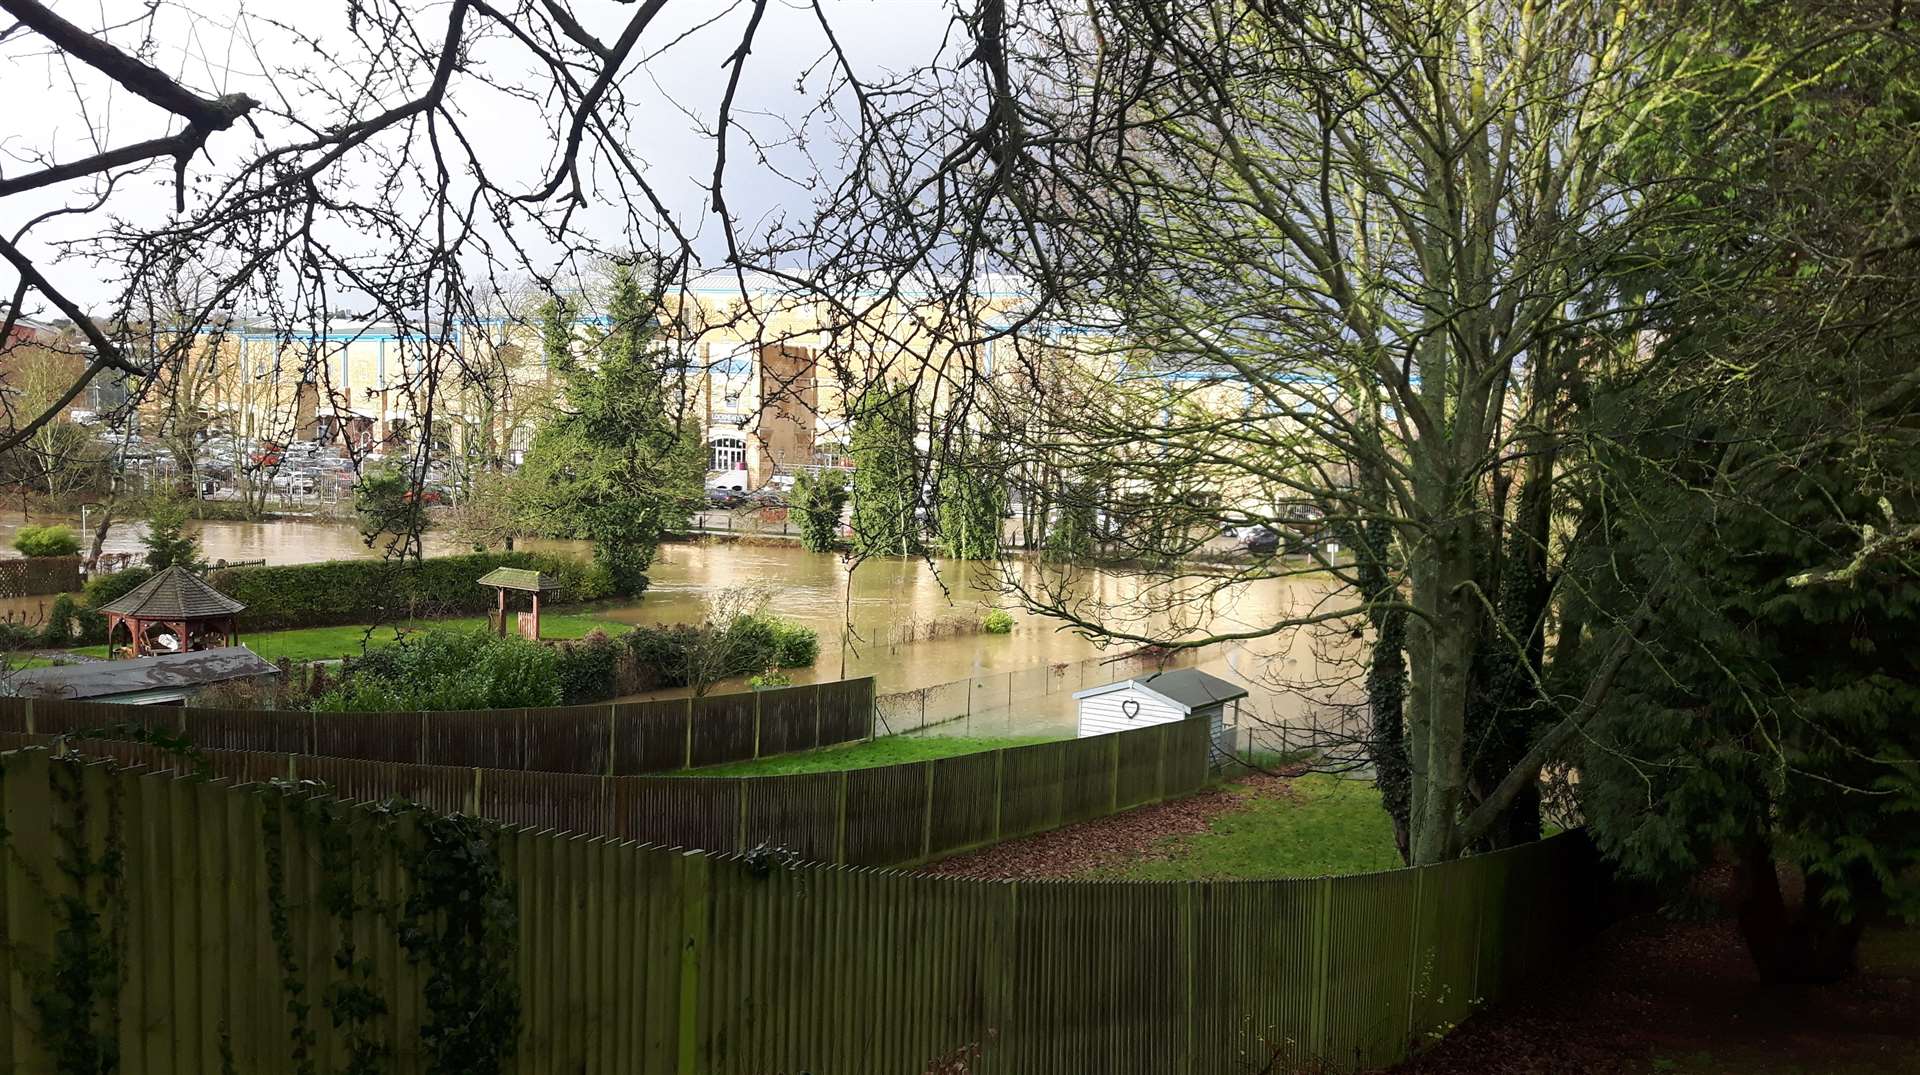 The River Medway by Lockmeadow in Maidstone has burst its banks